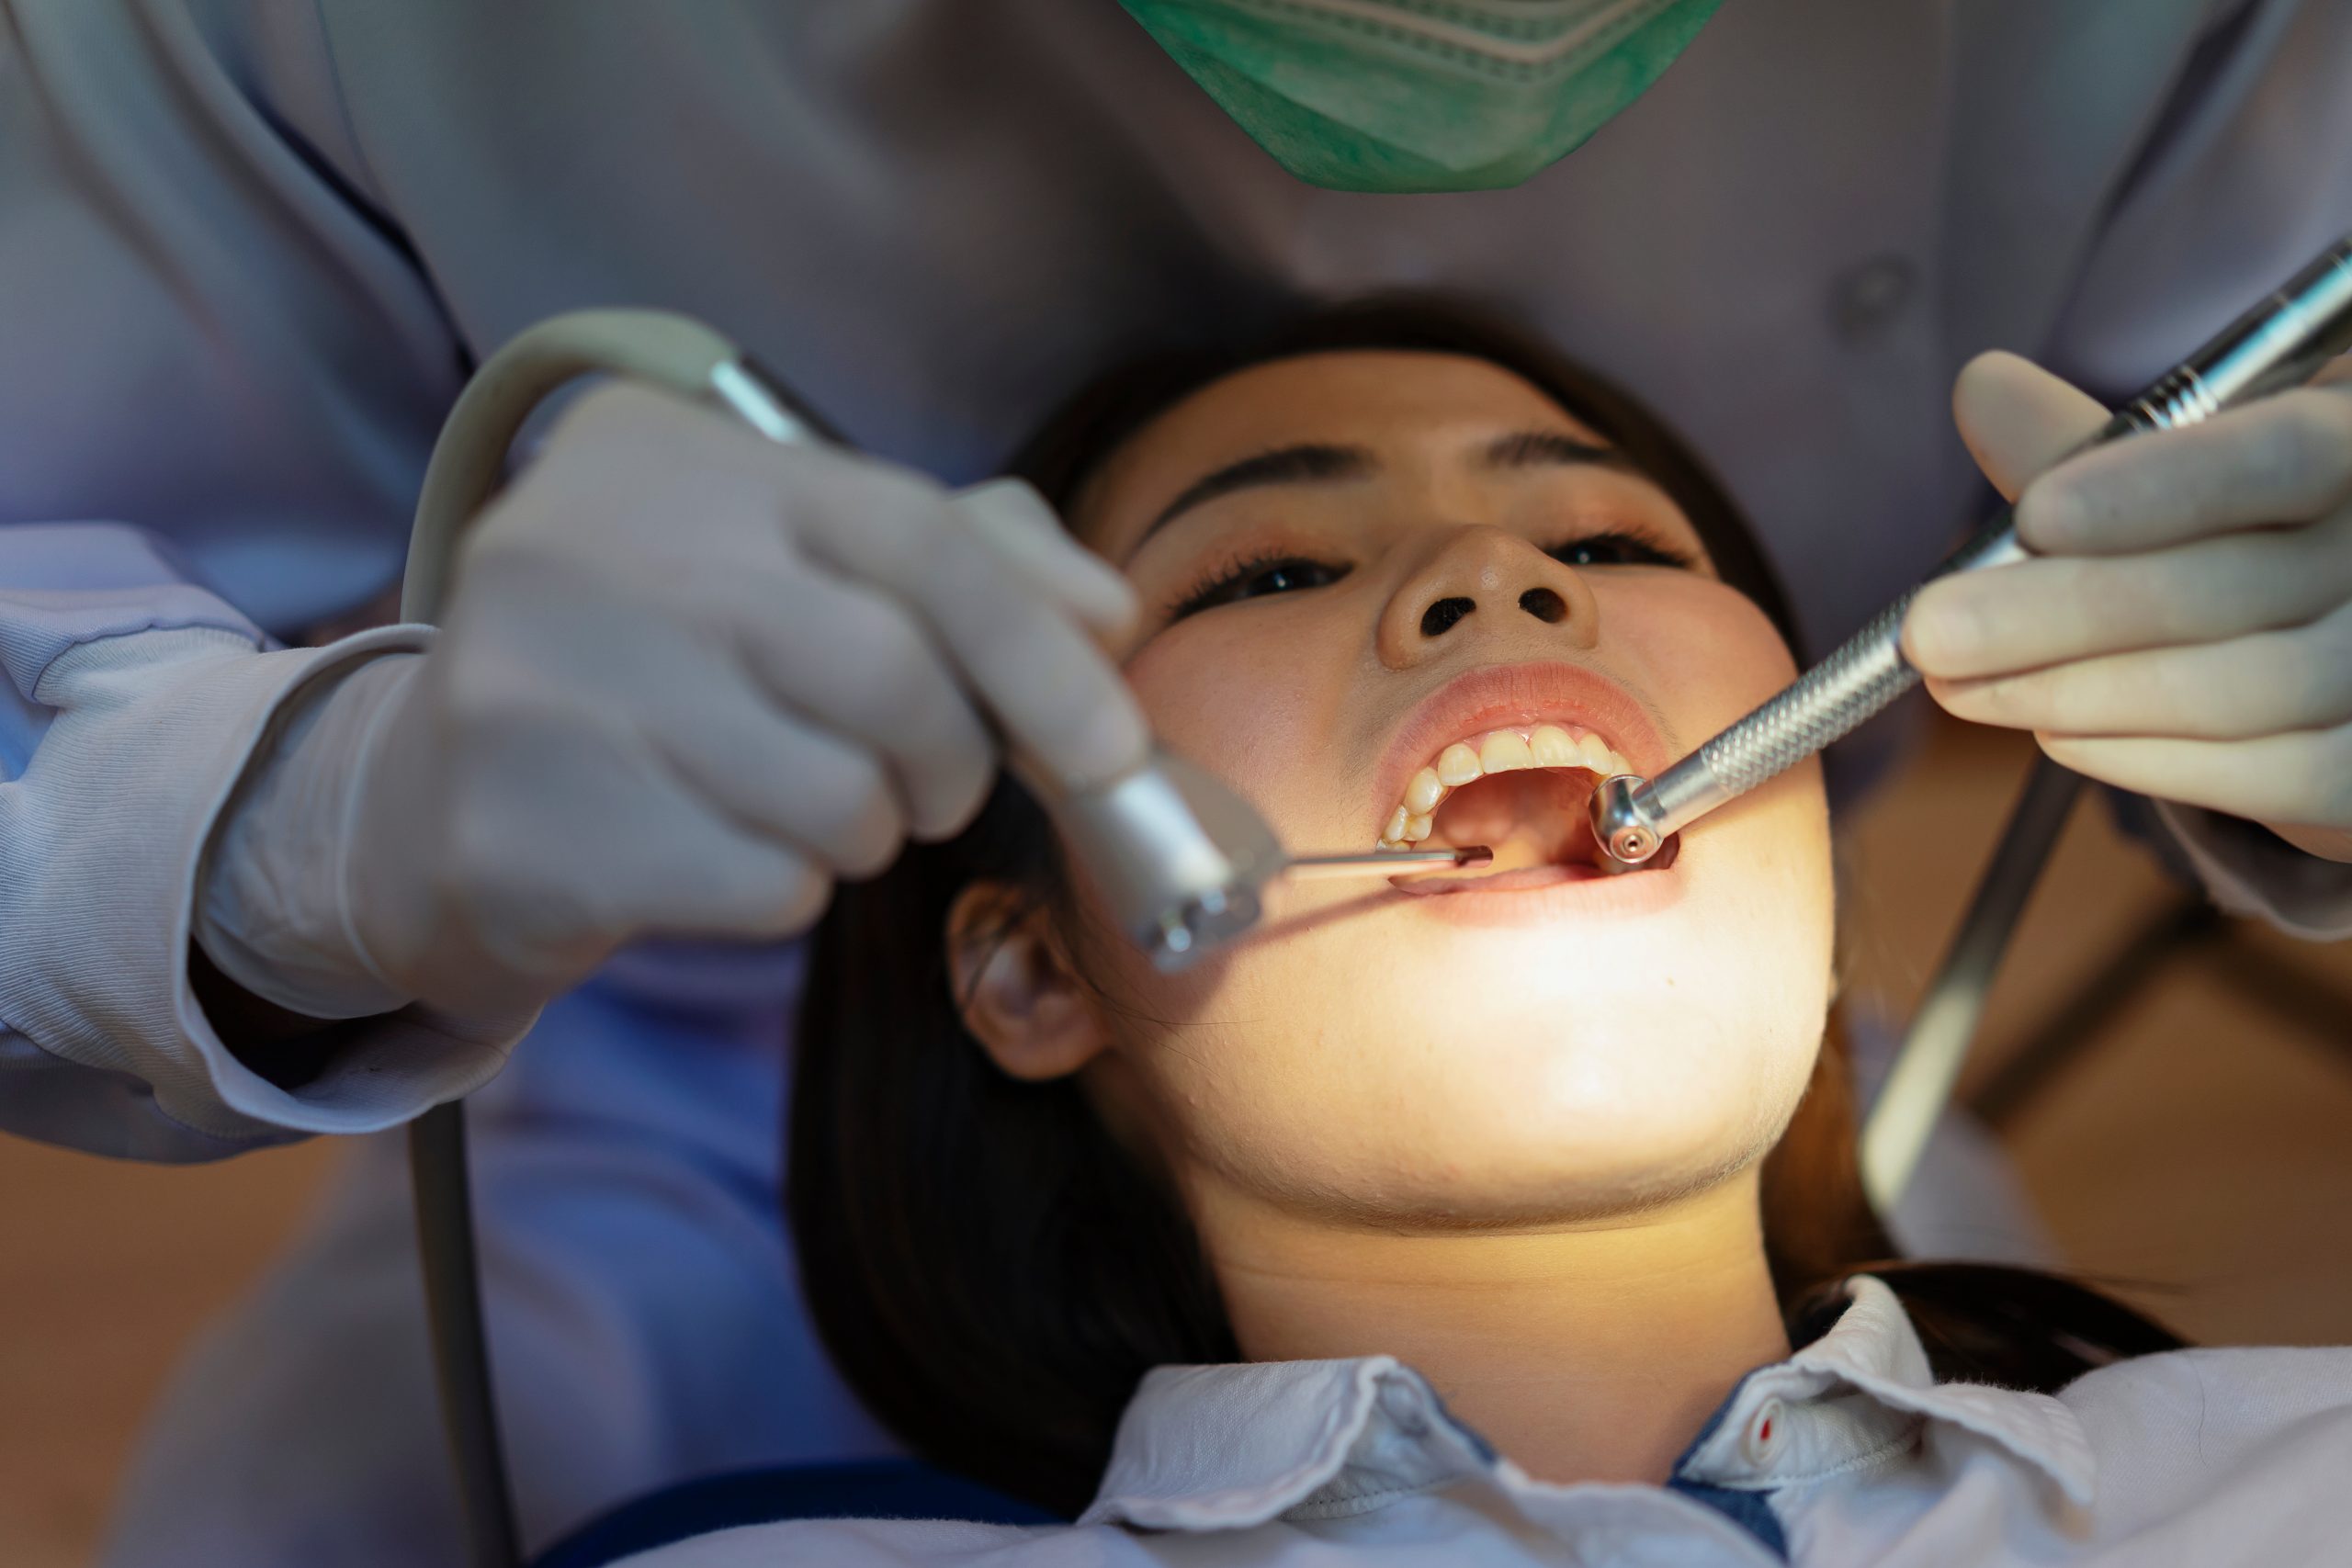 A dentist holding tools in a patient's mouth.